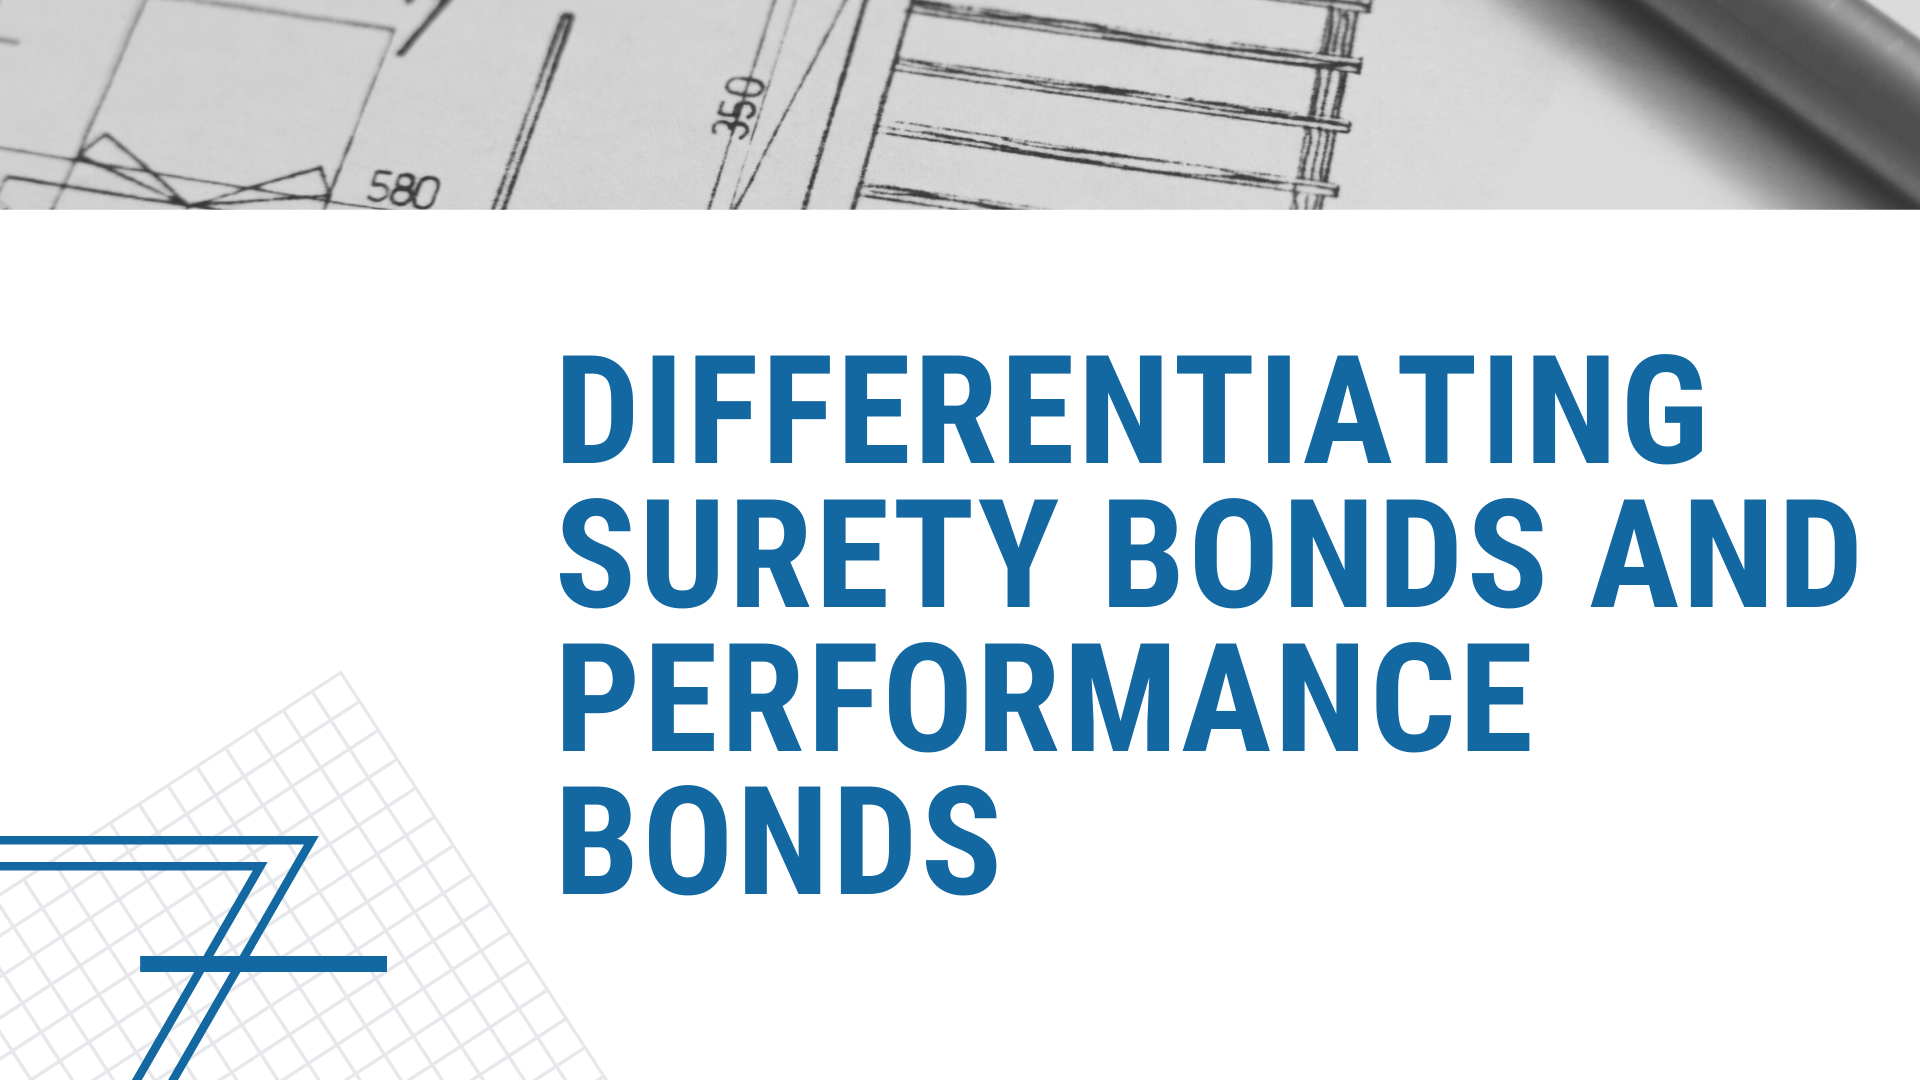 surety bond - What is the definition of a surety bond - building plan